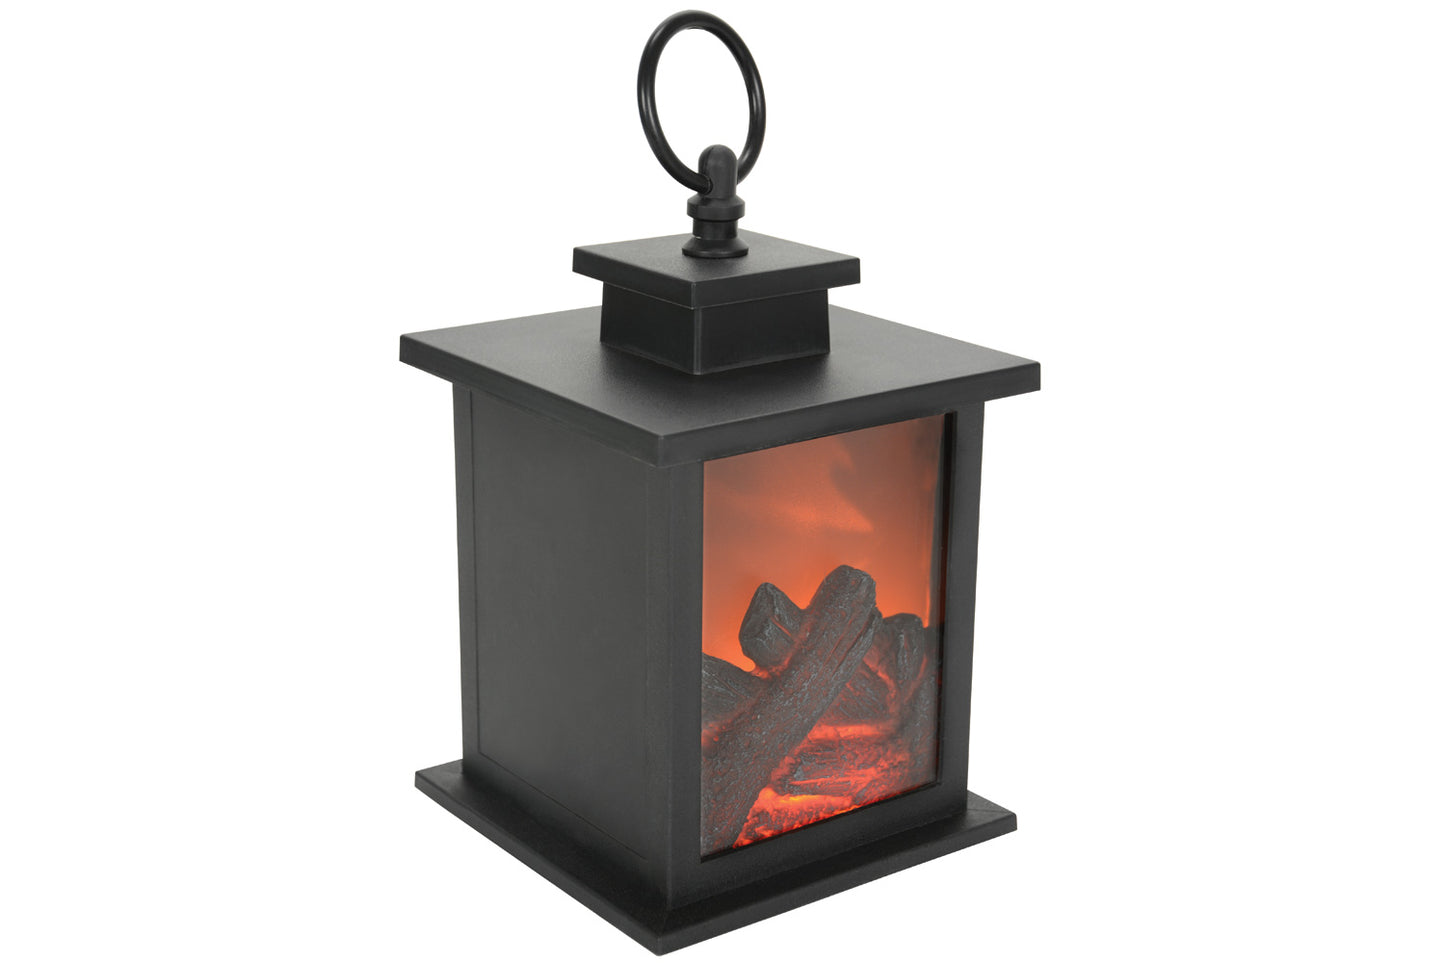 LED Fireplace Lantern with Timer Function